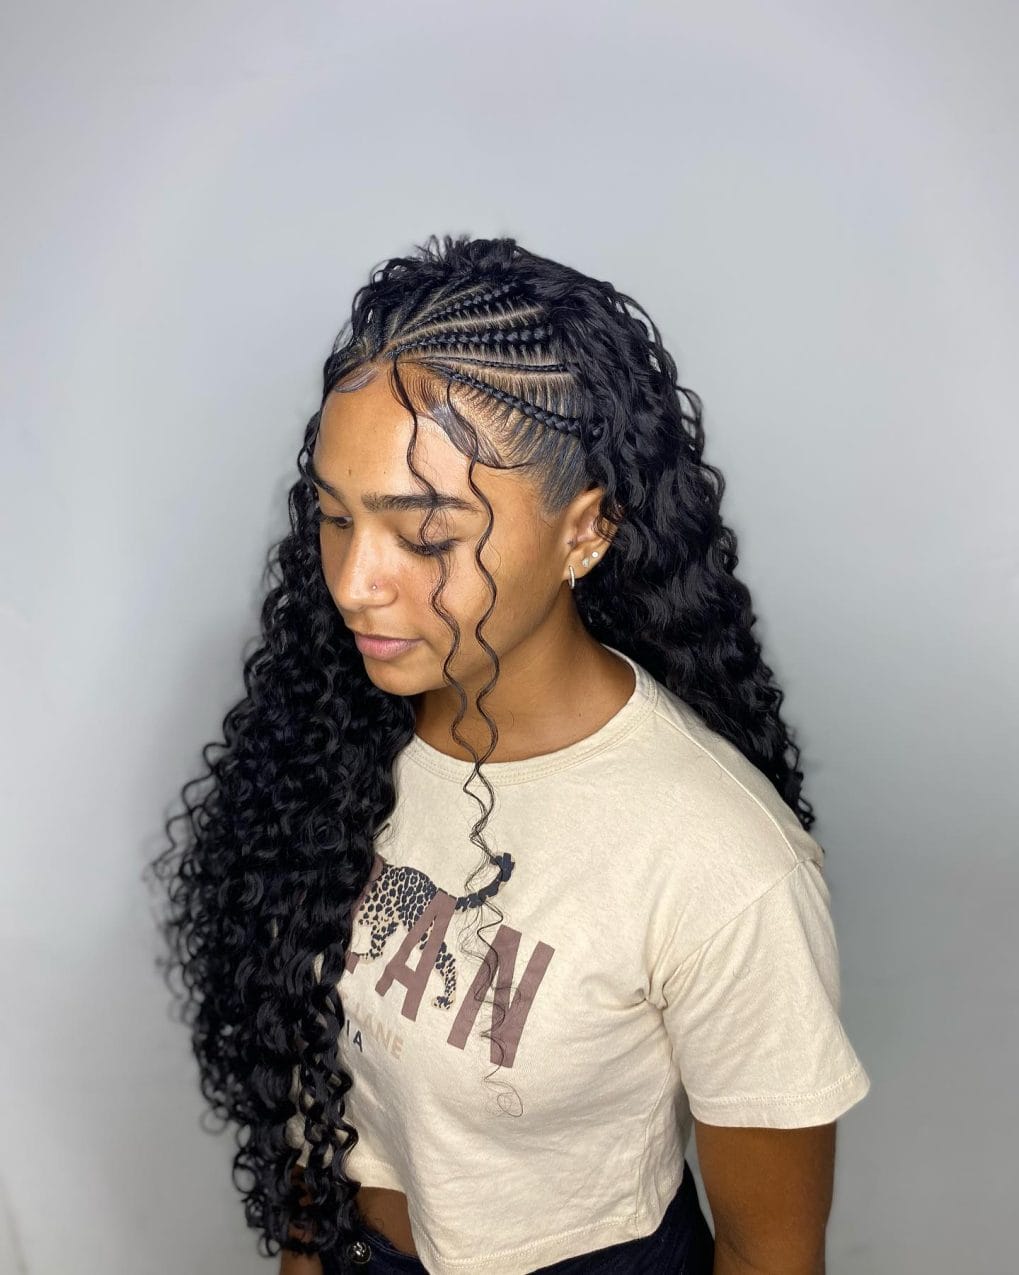 Natural curls fall from beautifully patterned braids with a single curly tendril